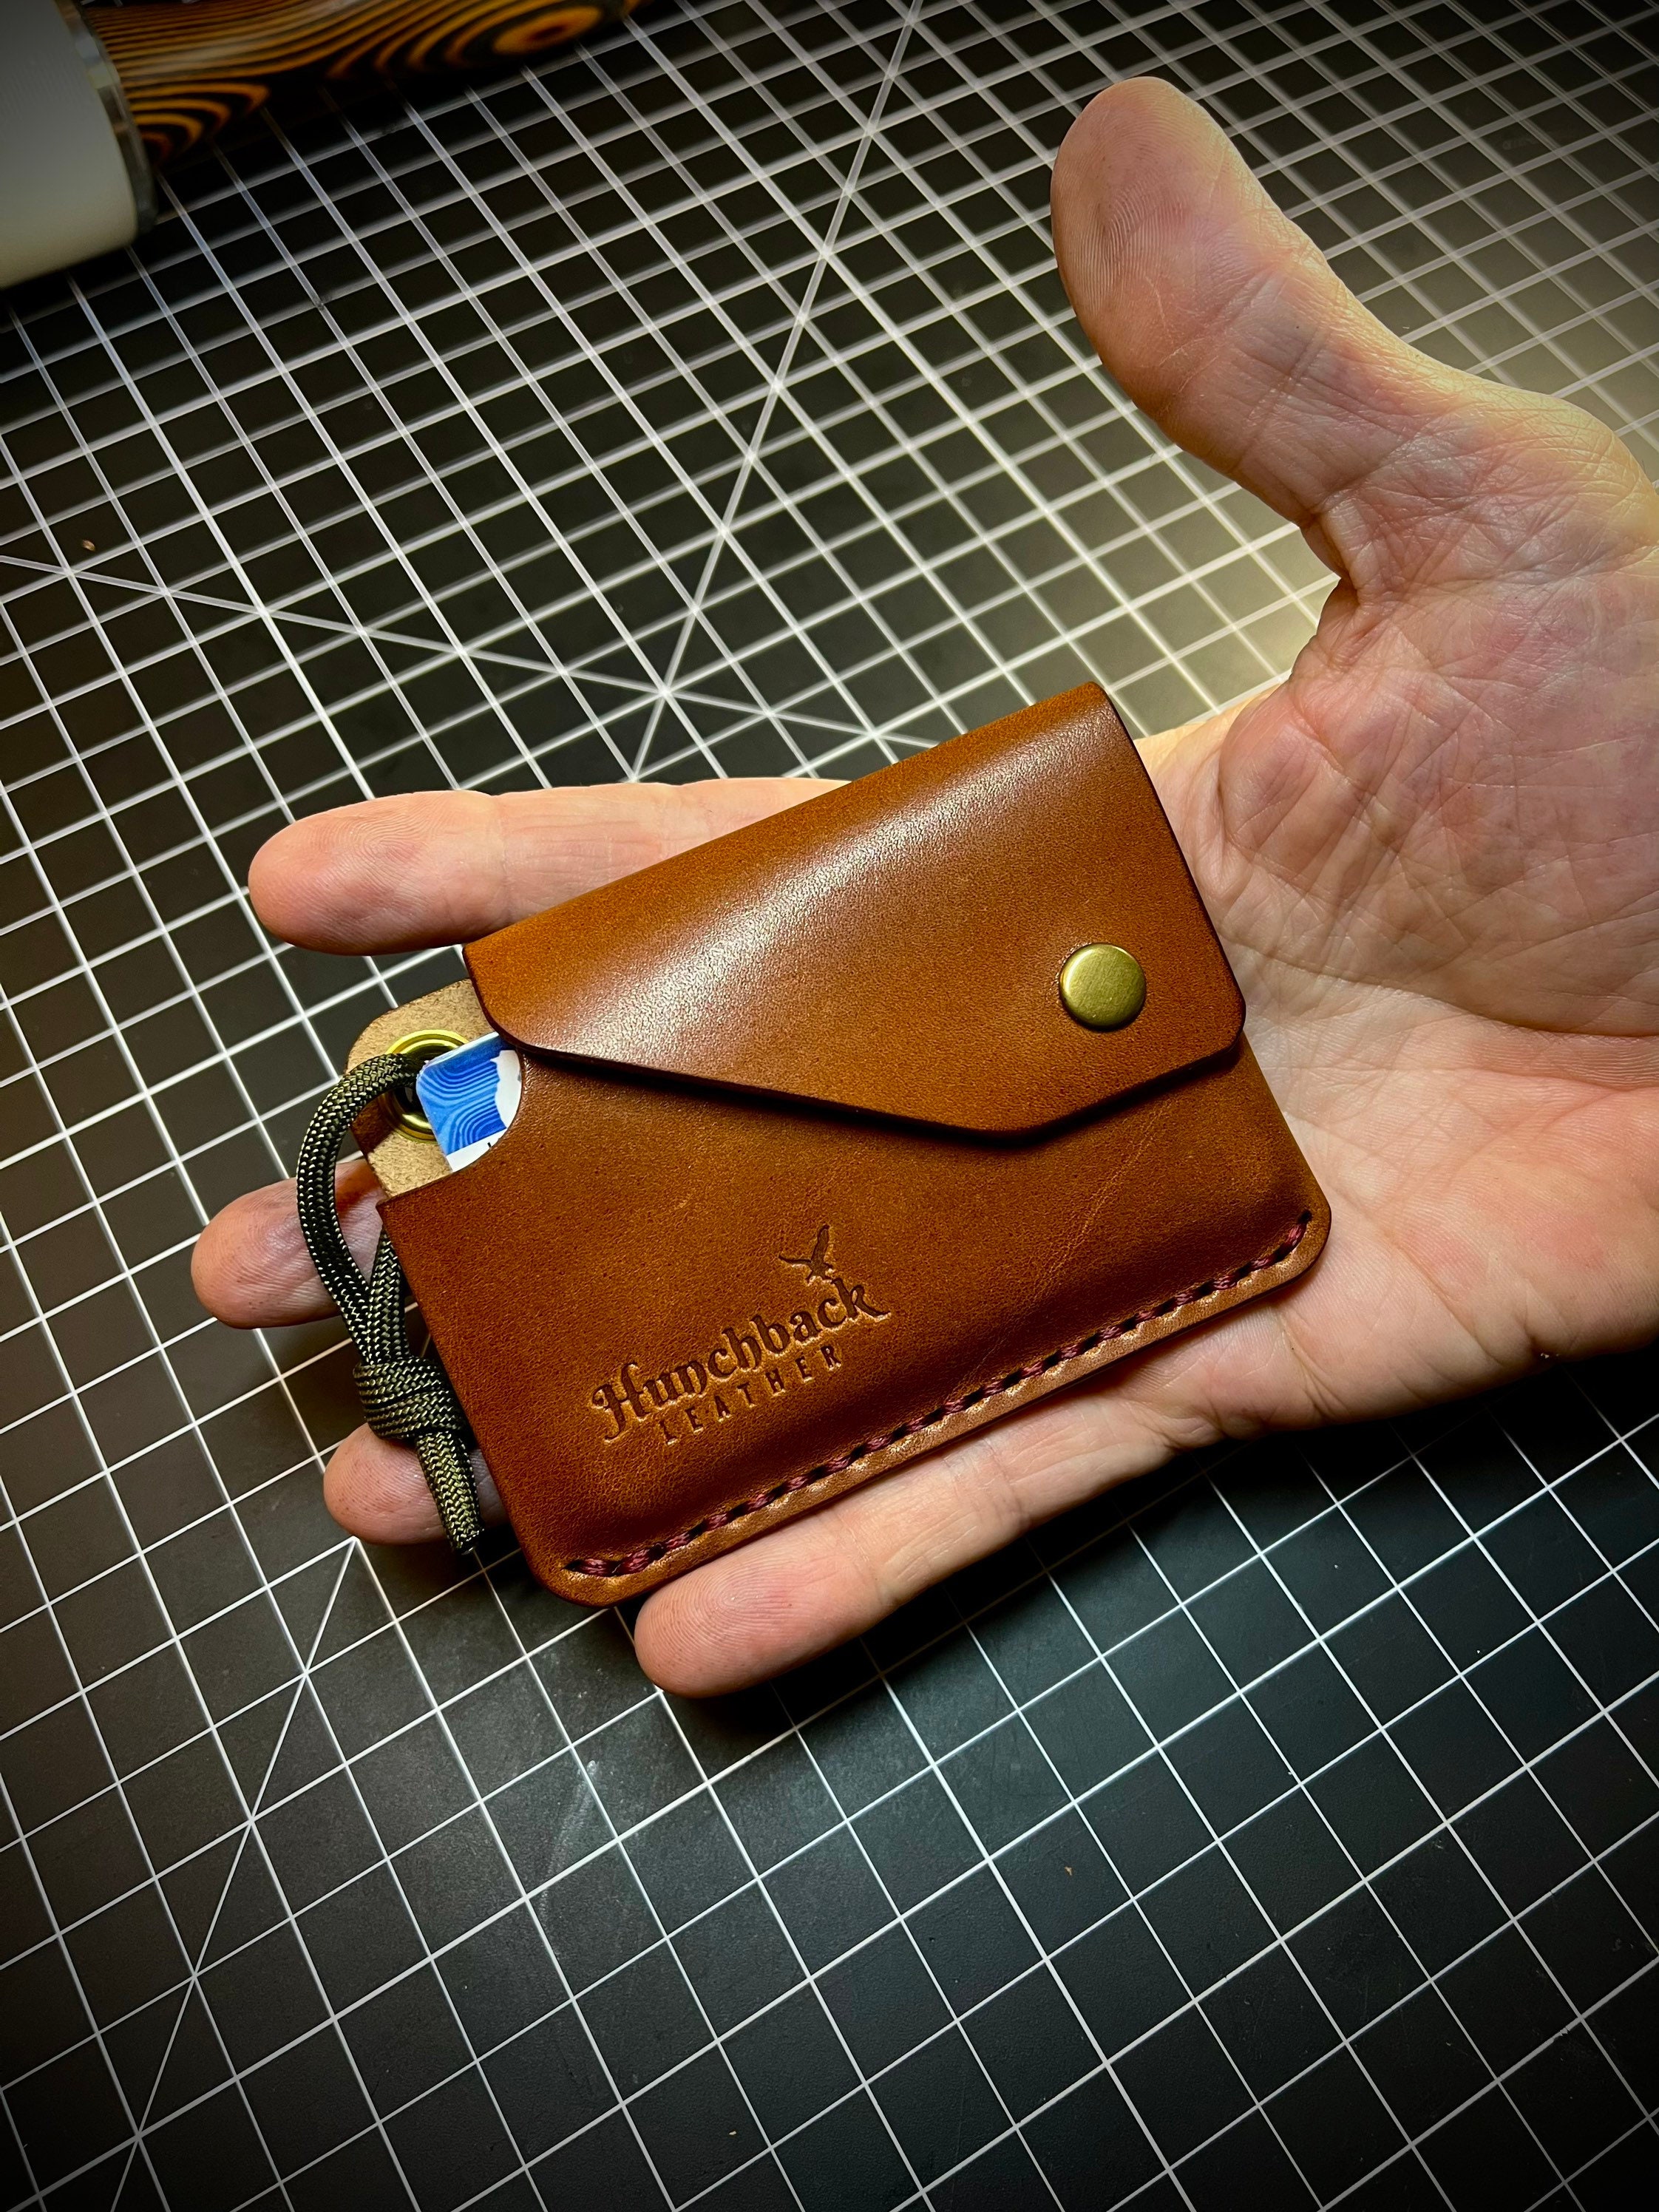 Wickets and Craig Harness Leather Minimalist Wallet Luxury 